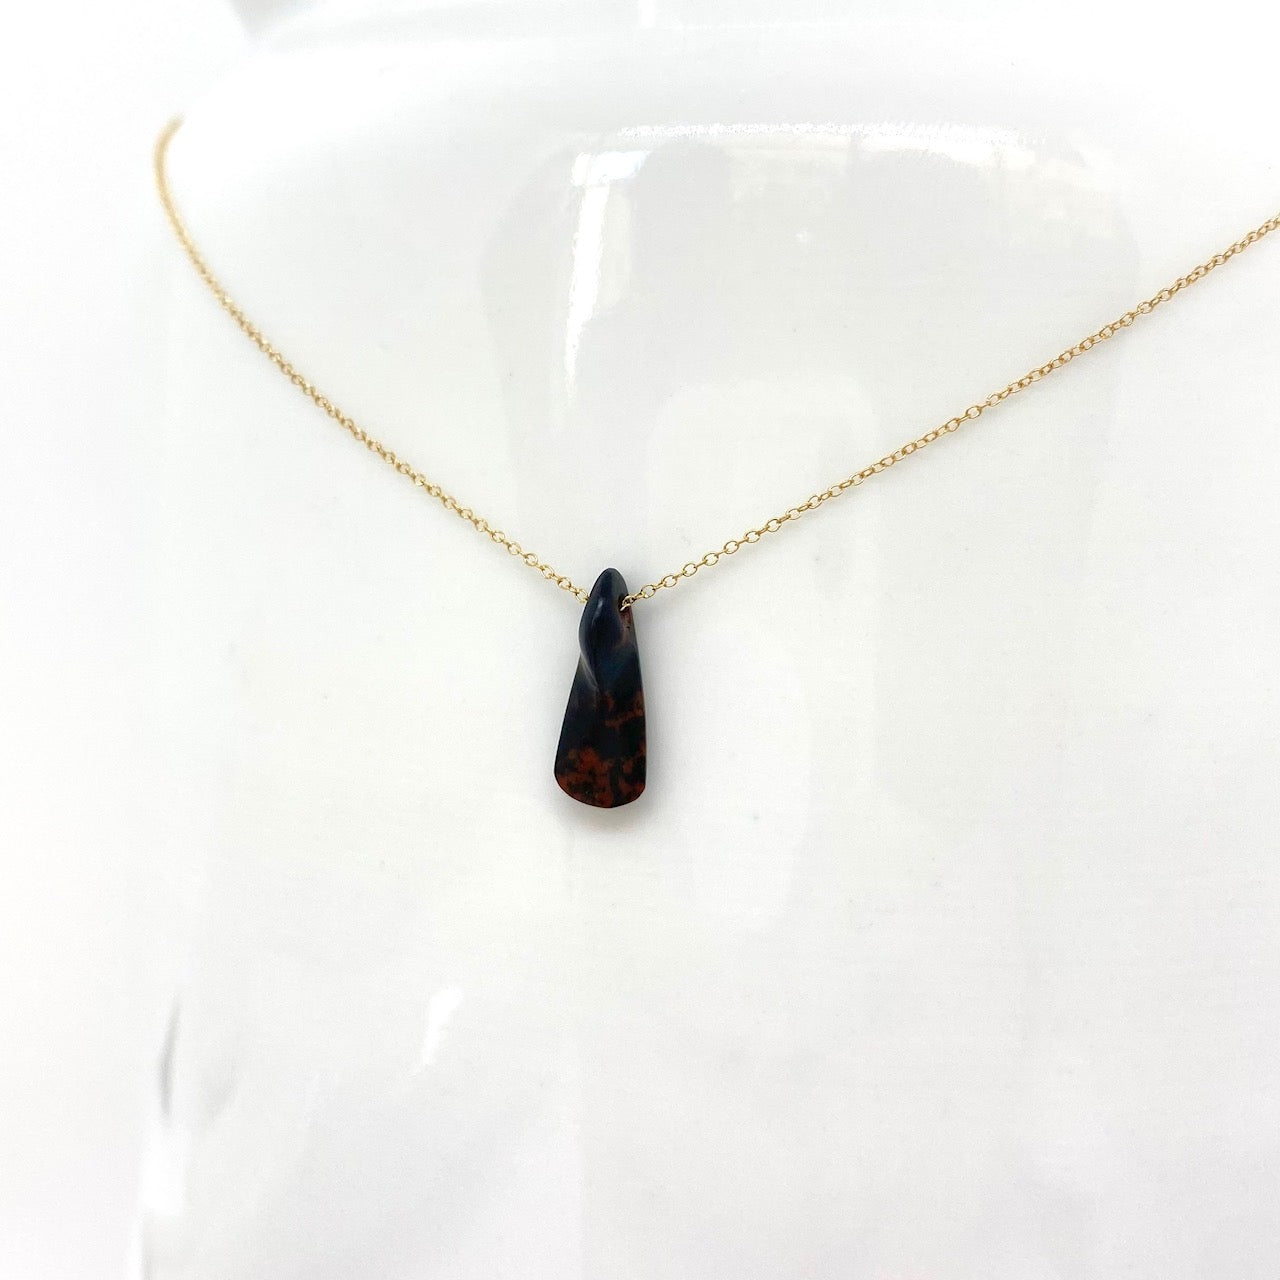 14k Gold Chain Necklace w/ Pre-Columbian Obsidian & Black Spinel